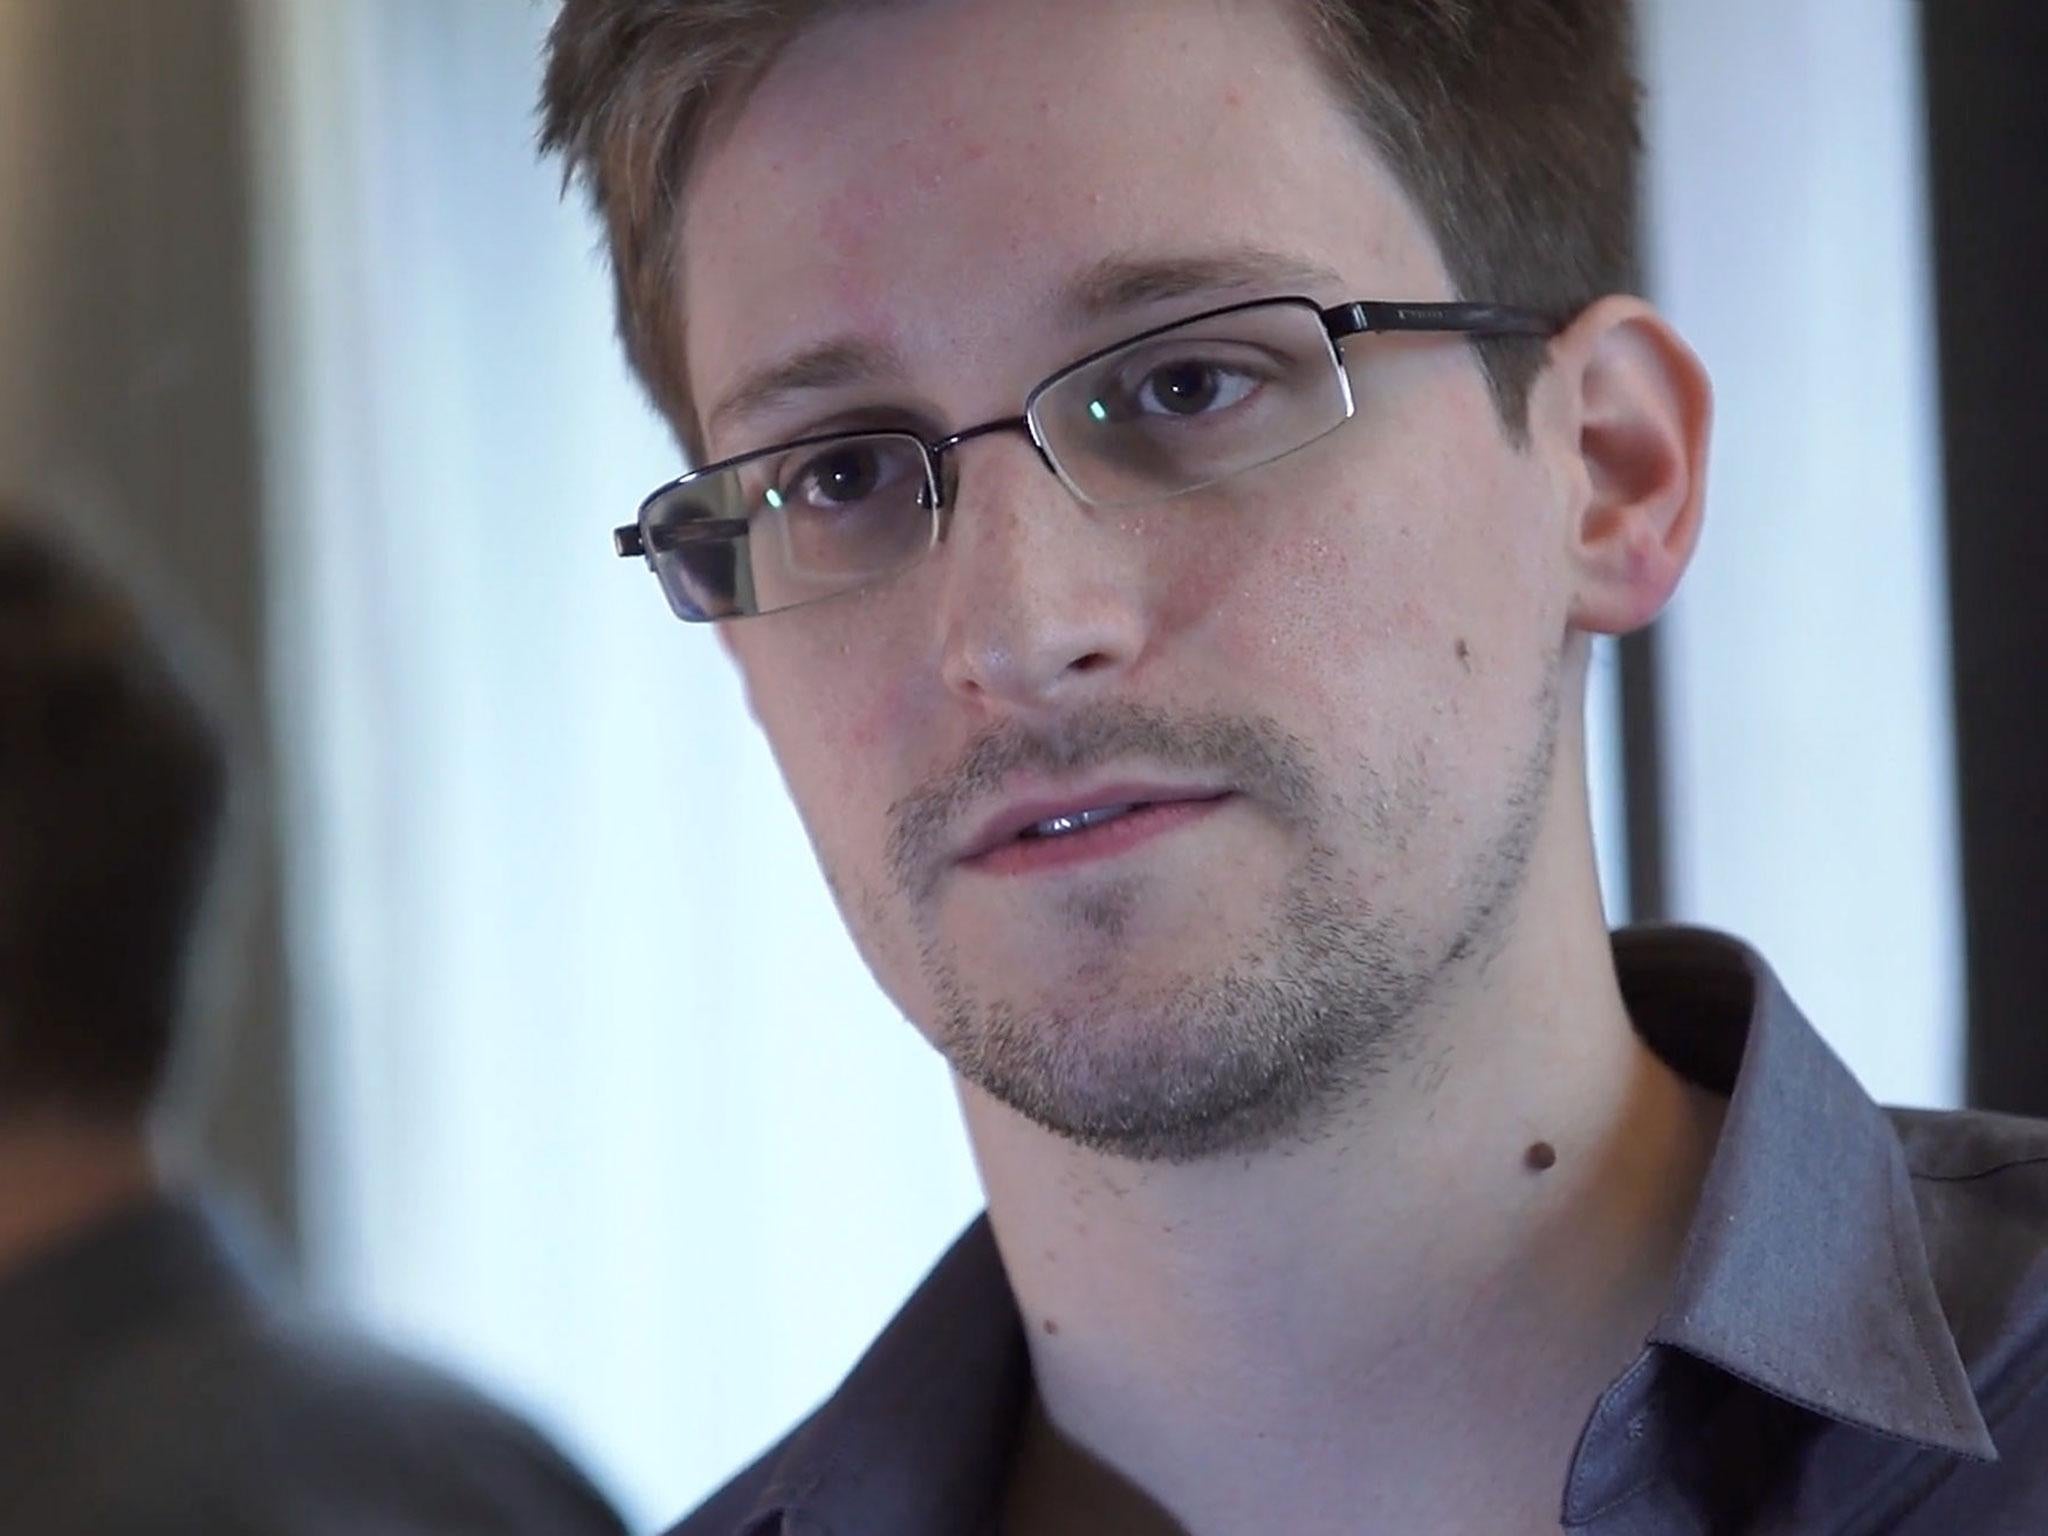 Snowden’s sharing of classified intelligence information was one of the largest leaks in US history